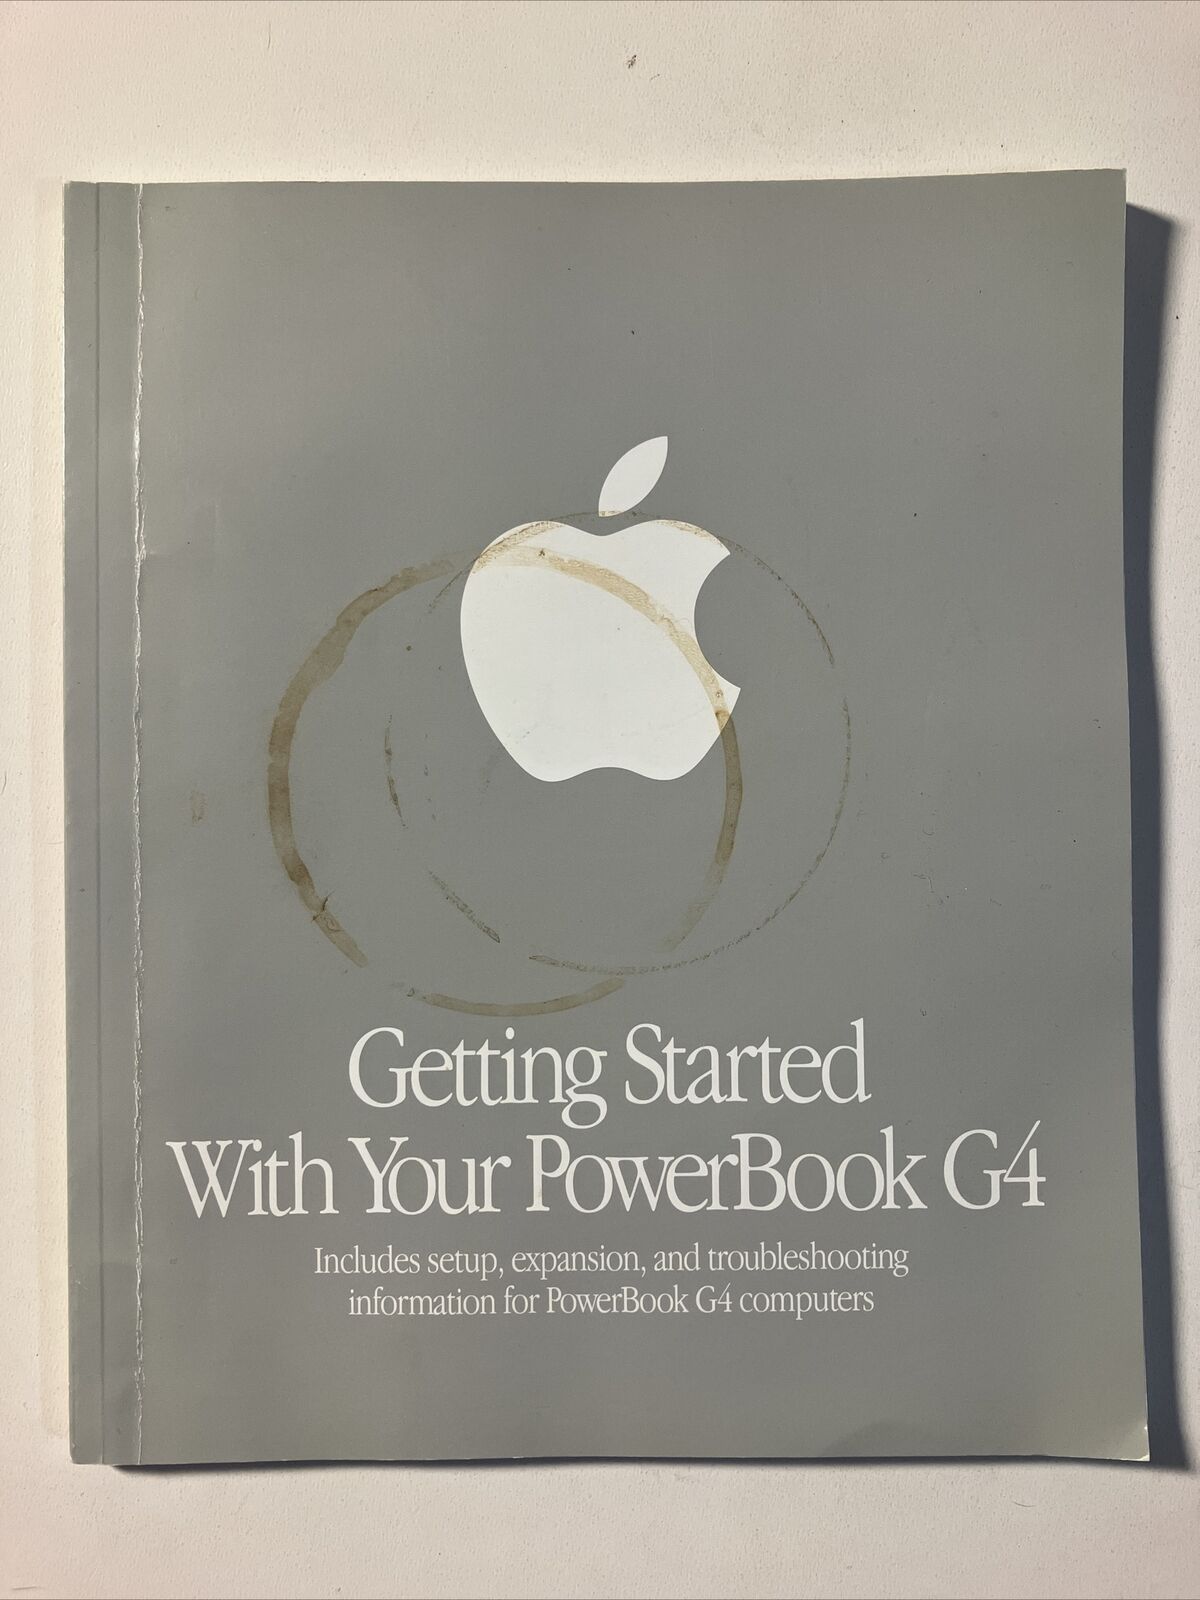 Getting Started With Your PowerBook G4 Plus Misc Paperwork Welcome to Mac OS X